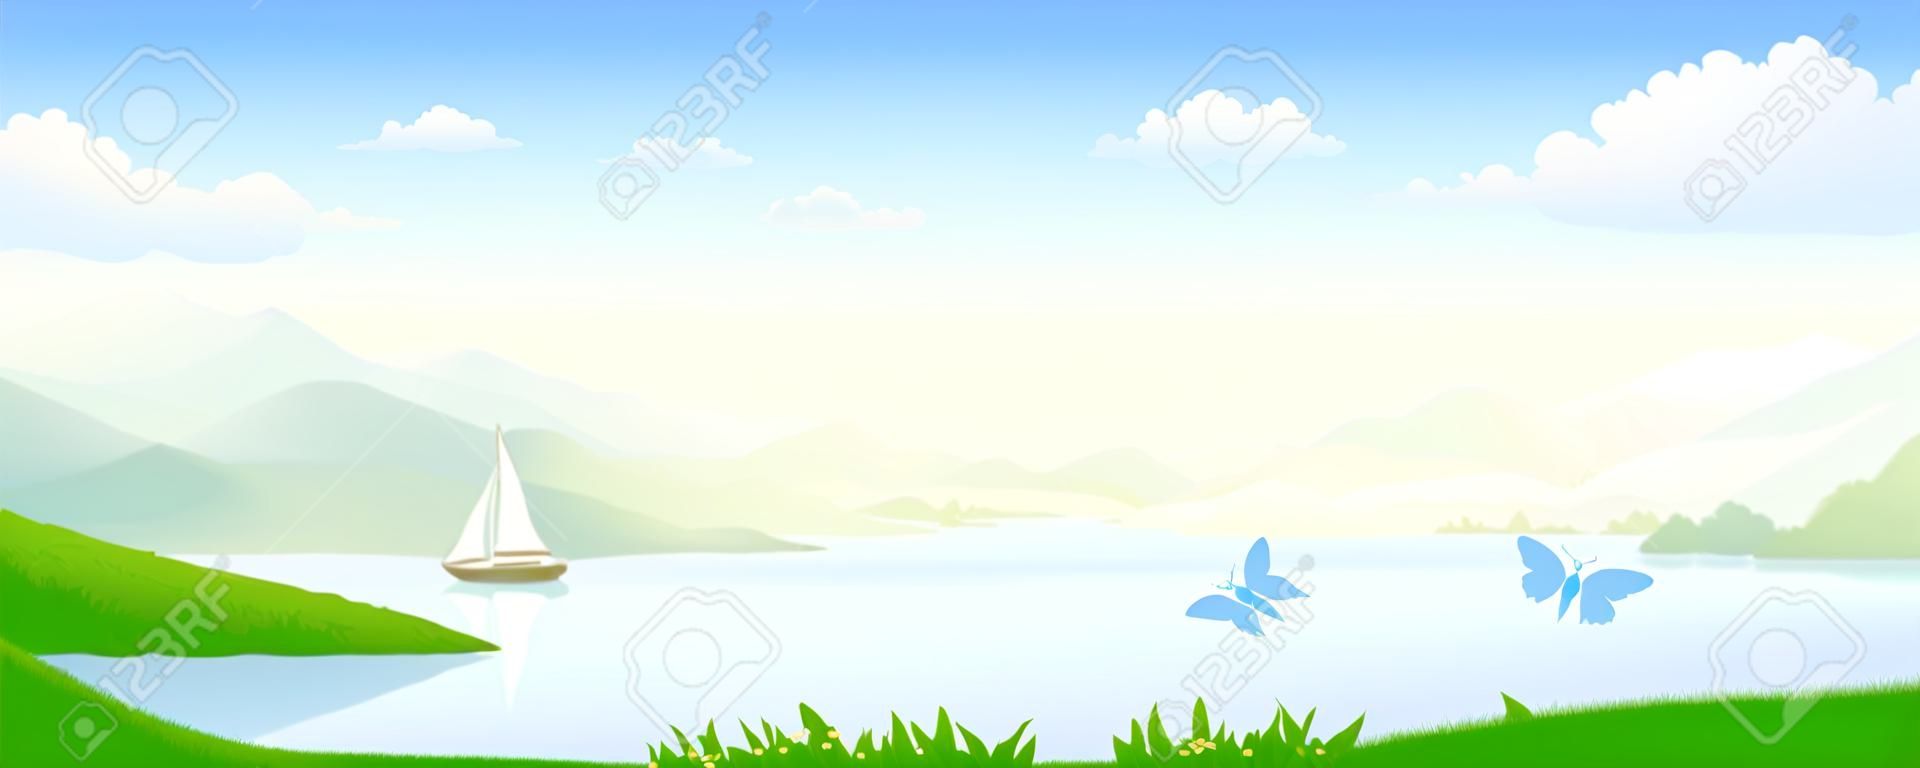 Vector illustration of a river landscape panorama